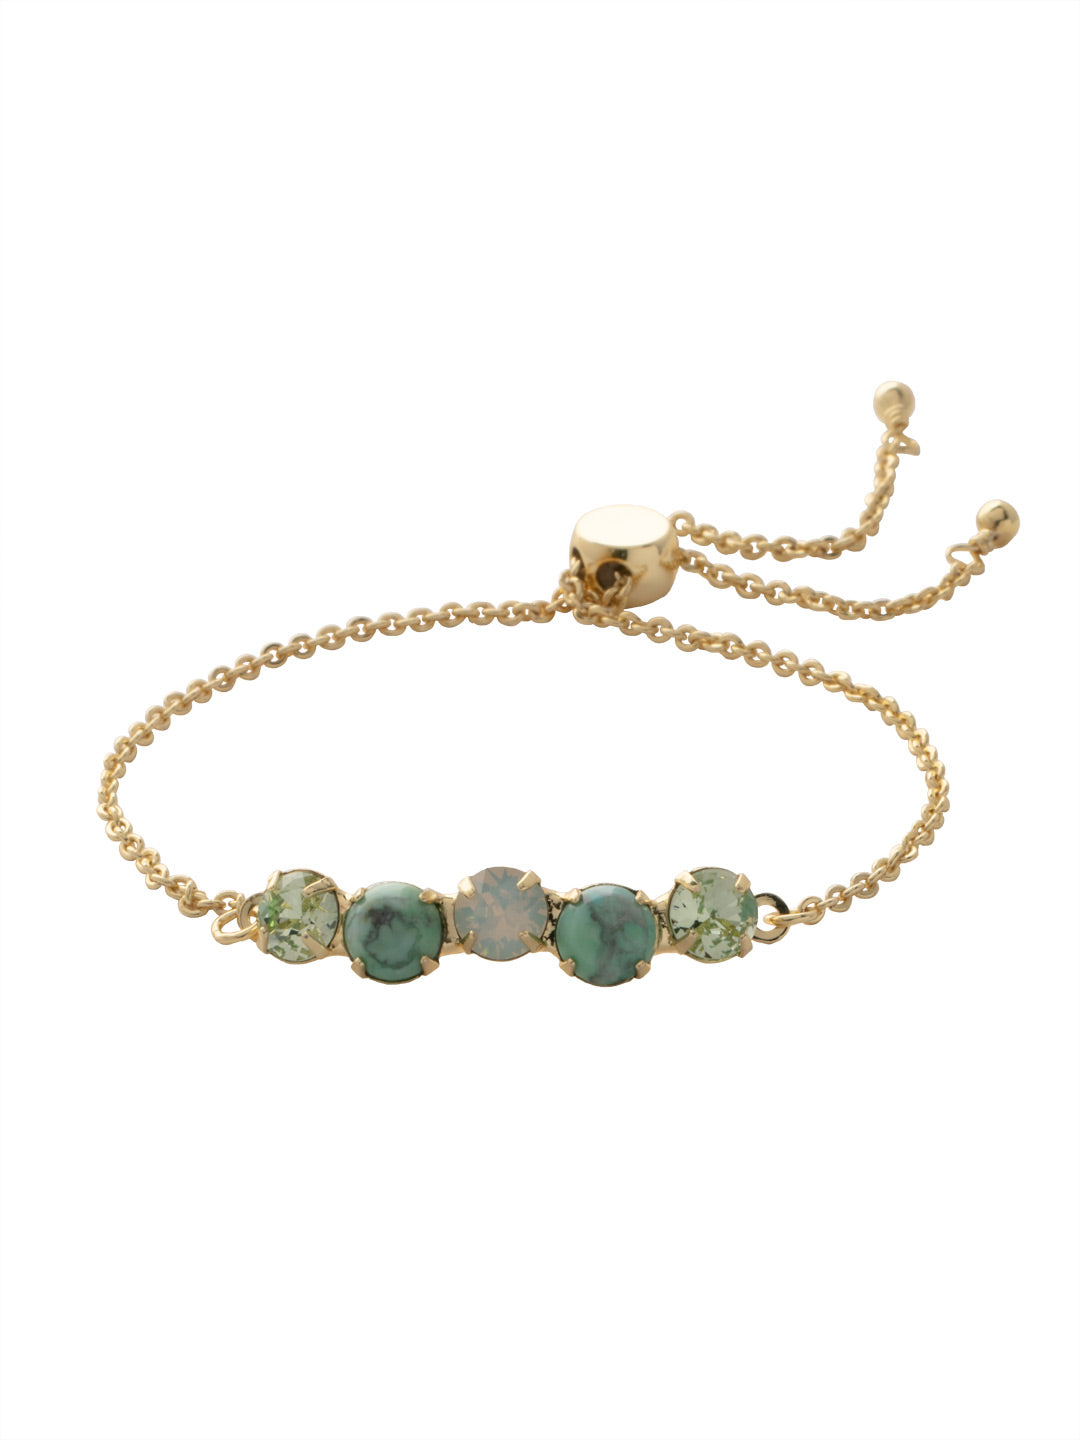 Xena Slider Bracelet - BFF1BGSGR - <p>The Xena Slider Bracelet features a line of round semi-precious stones on a delicate adjustable chain. From Sorrelli's Sage Green collection in our Bright Gold-tone finish.</p>